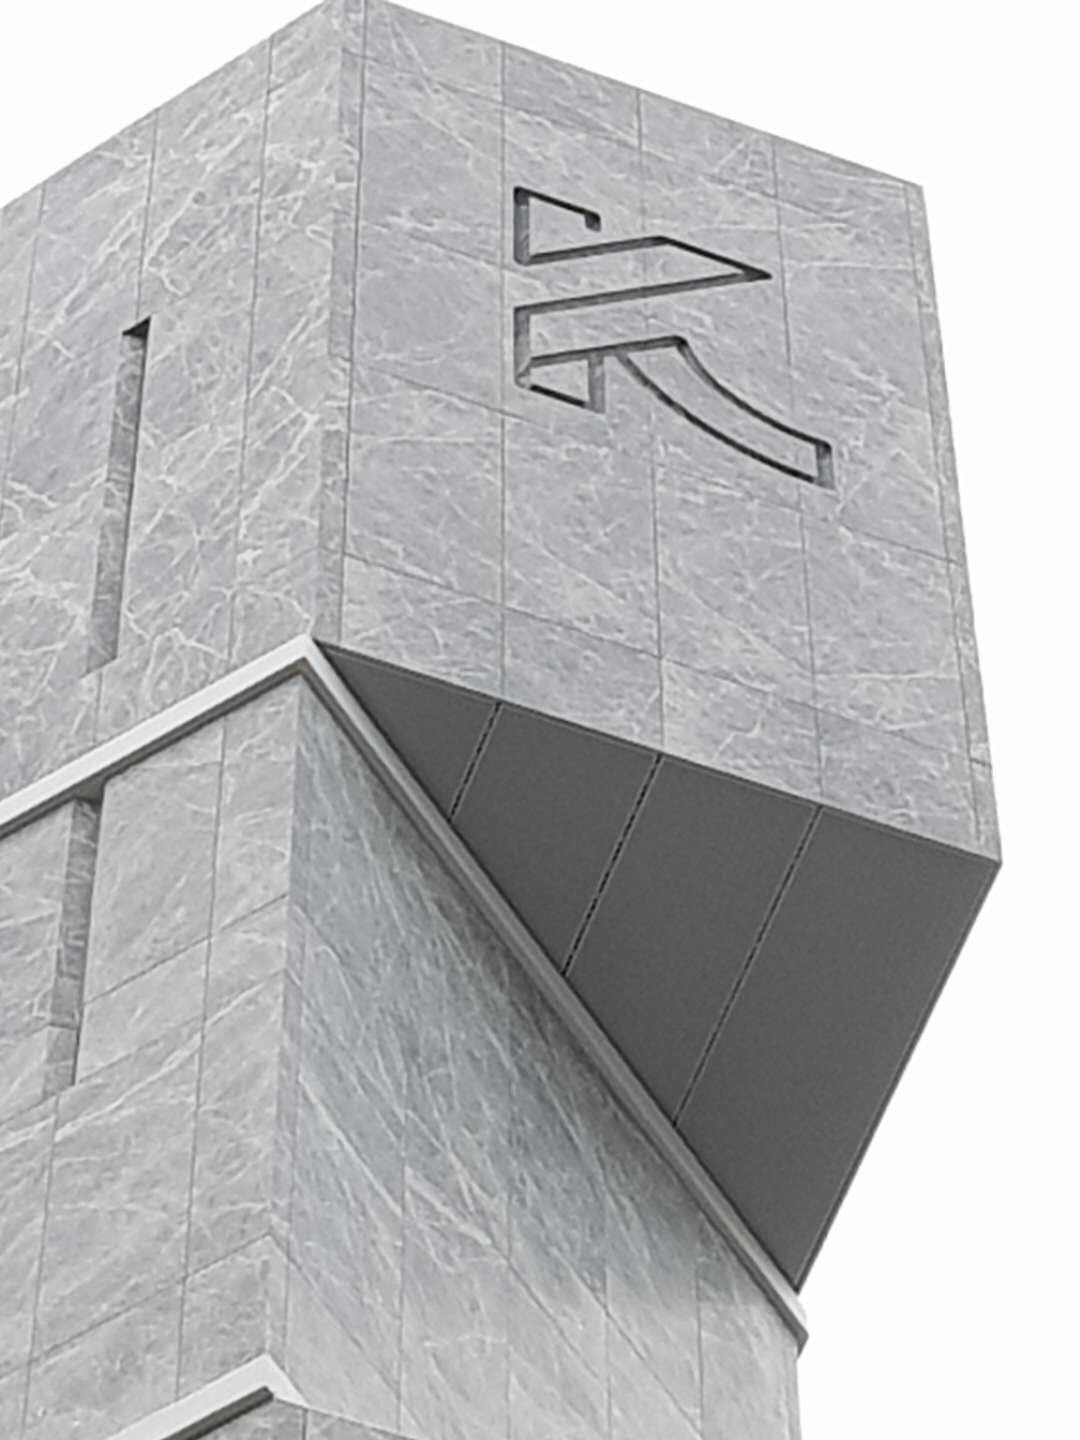 The Khong Guan Office Building, Singapore - brand logo displayed on exterior honeycomb cladding